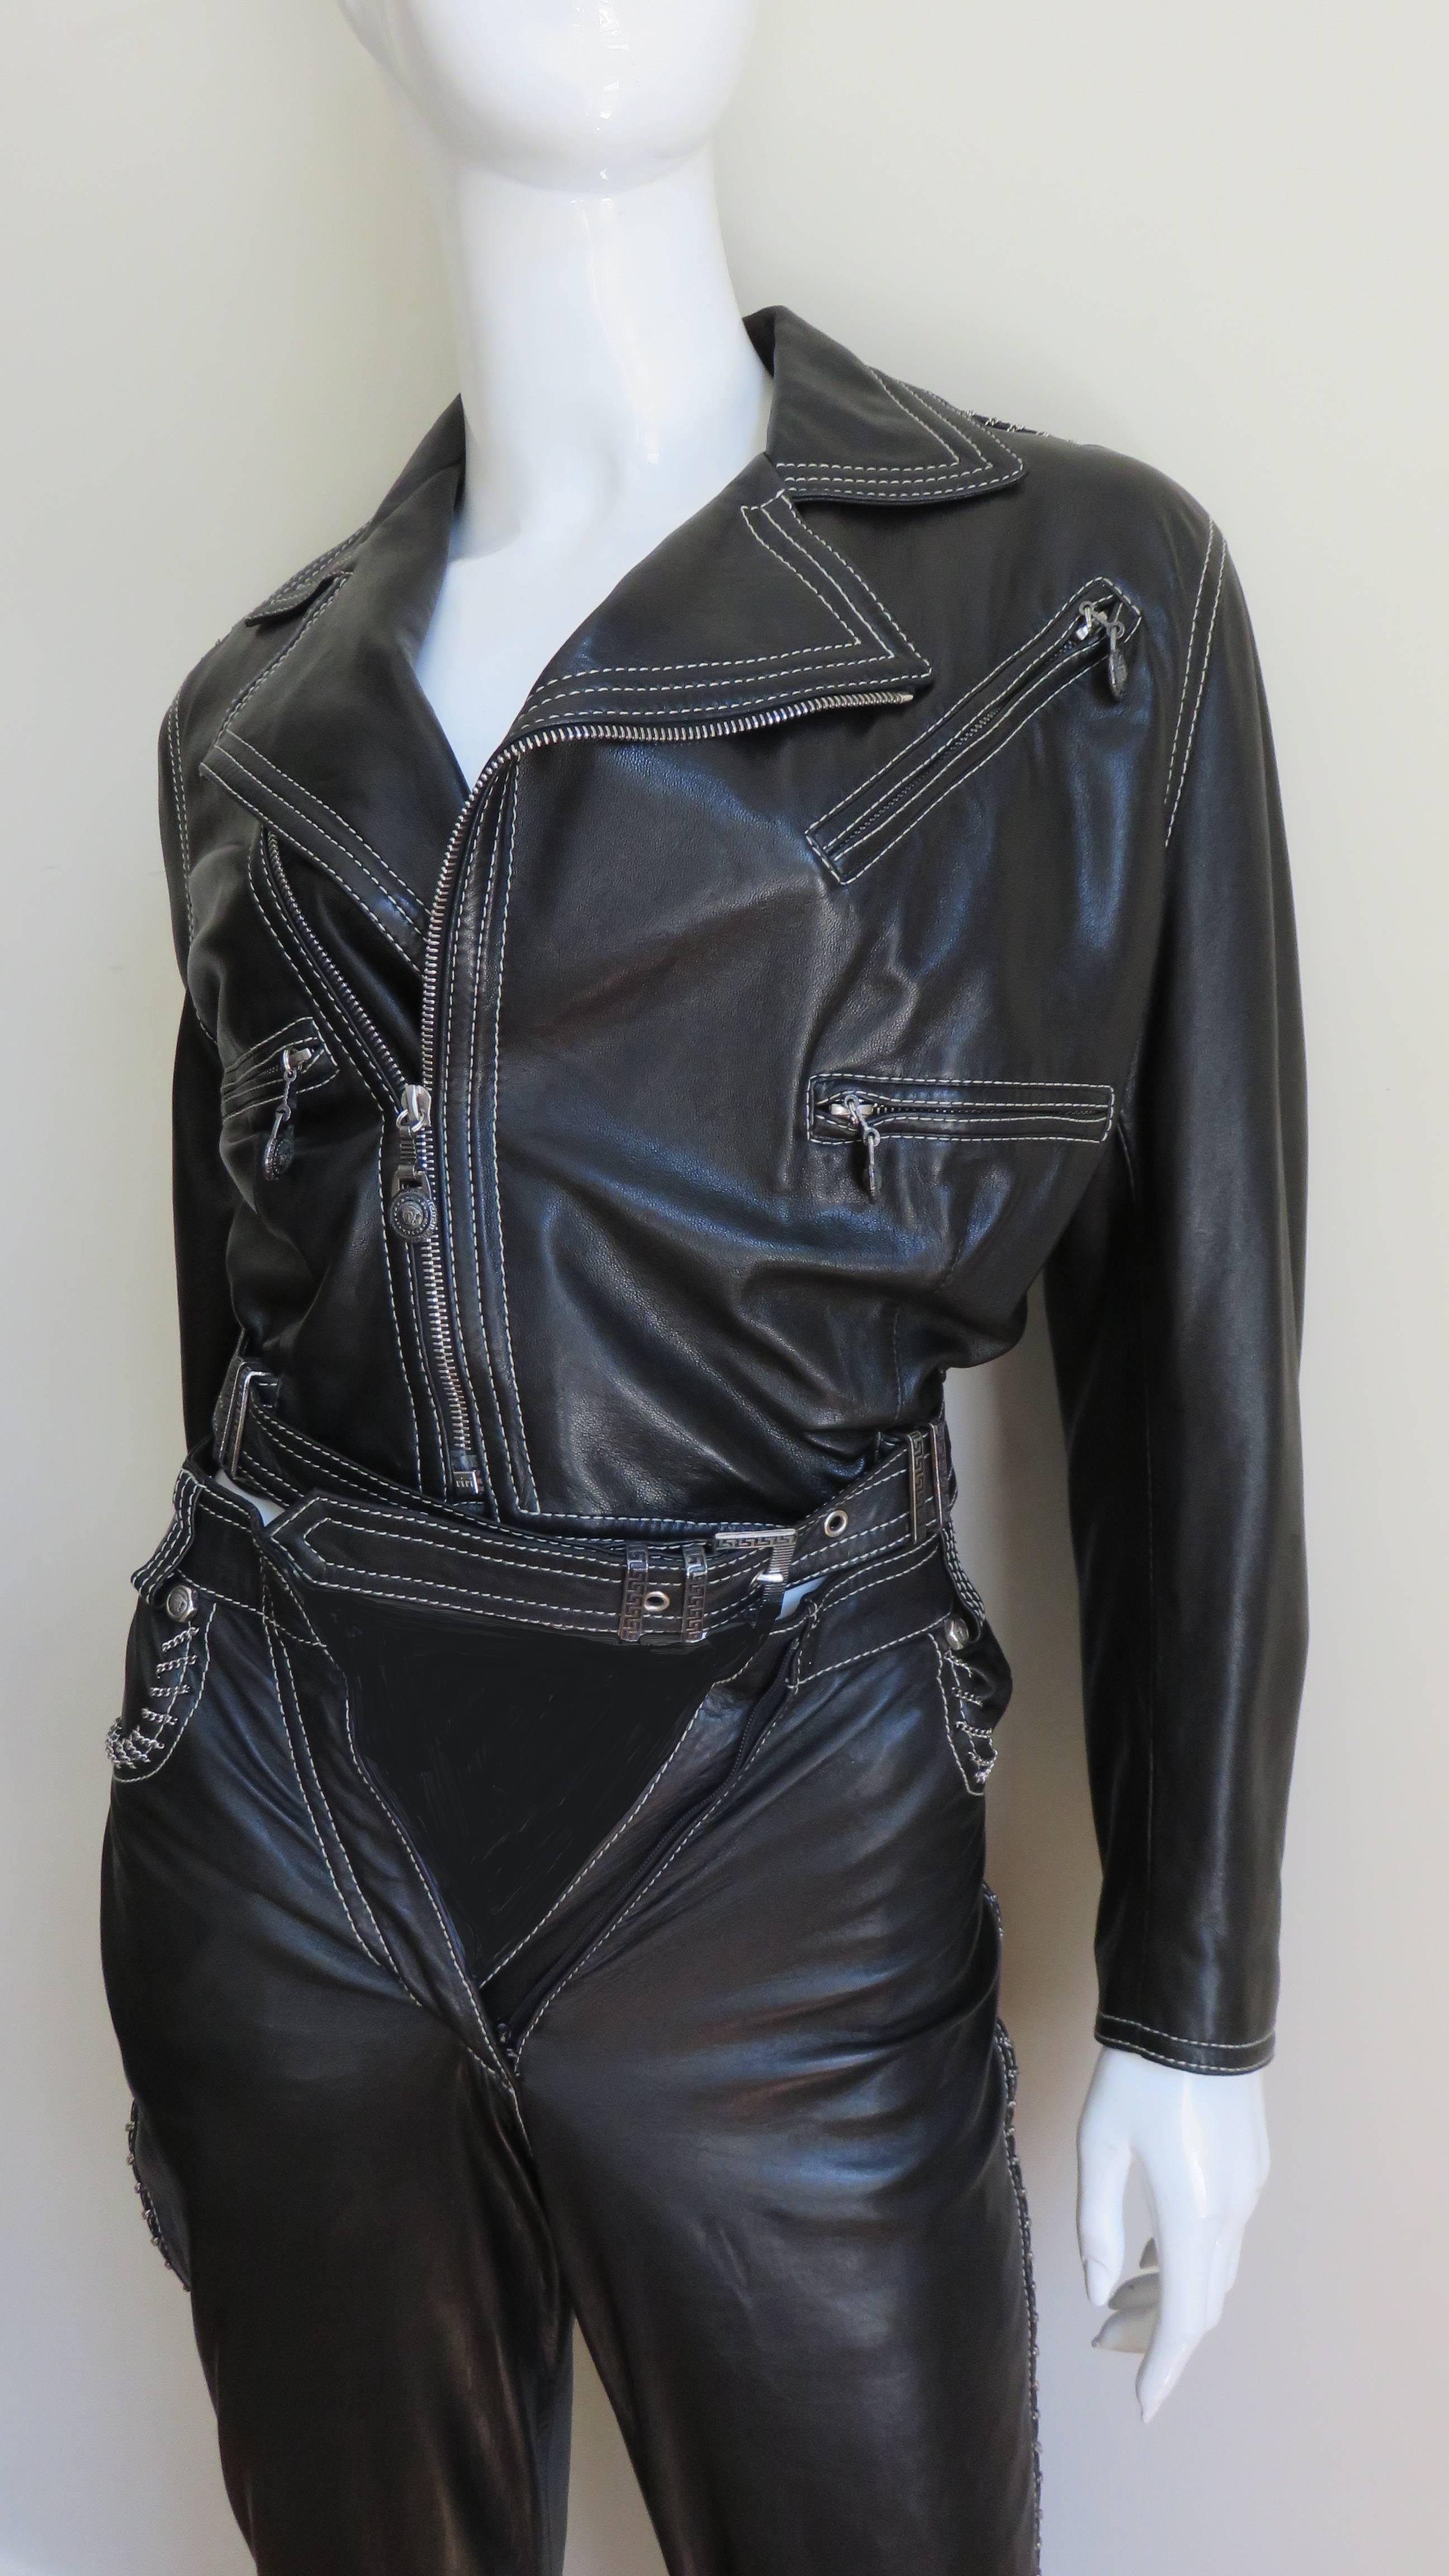  Gianni Versace A/W 1992 Leather Motorcycle Jacket and Pants With Chain Trim  For Sale 2